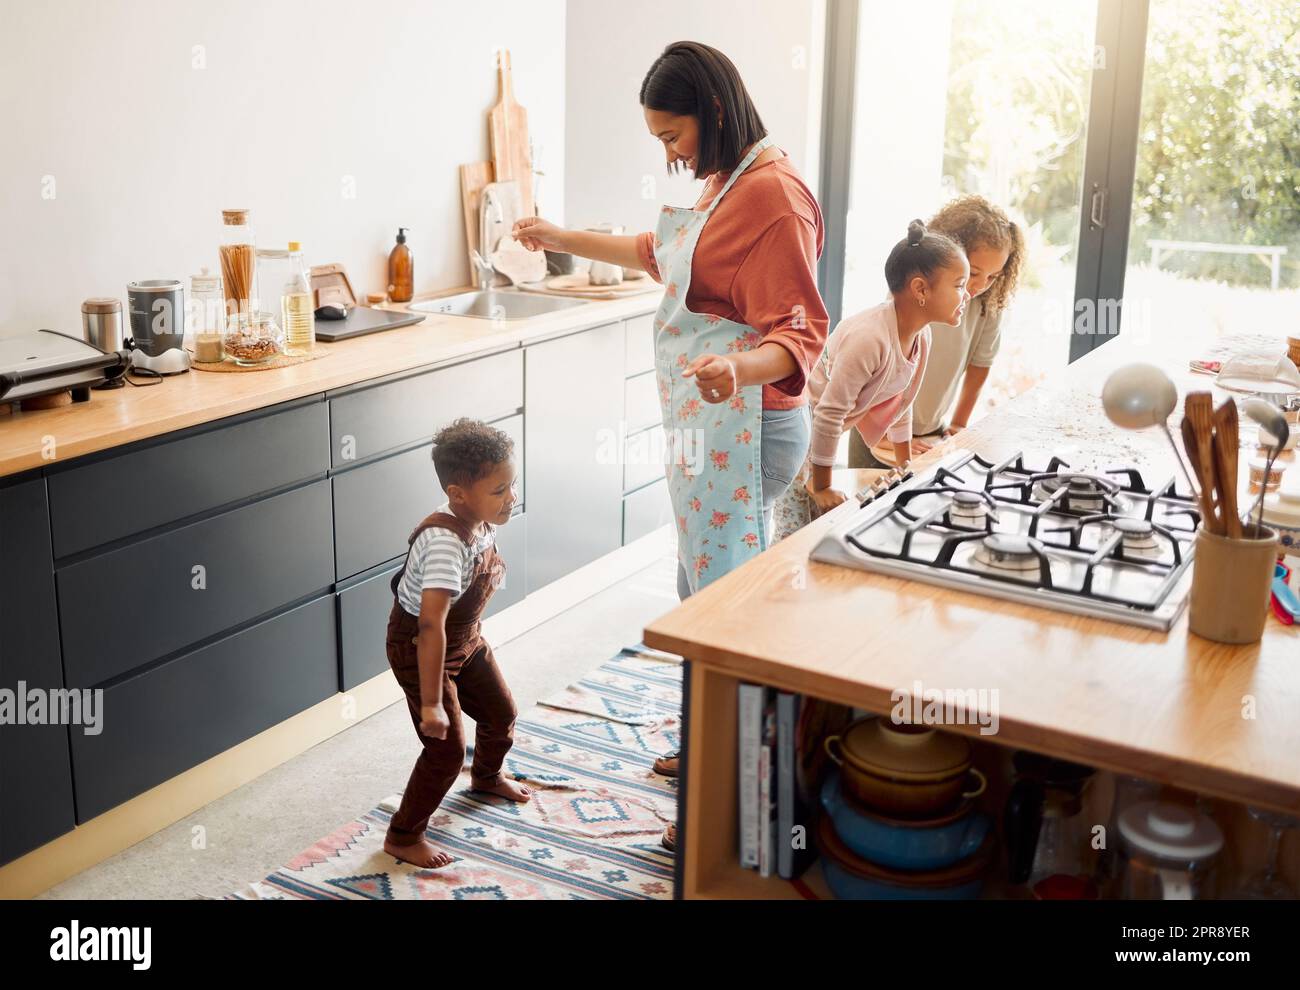 A happy mixed race family of five cooking and having fun in a kitchen together. Loving black single parent bonding with her kids while teaching them domestic skills at home Stock Photo